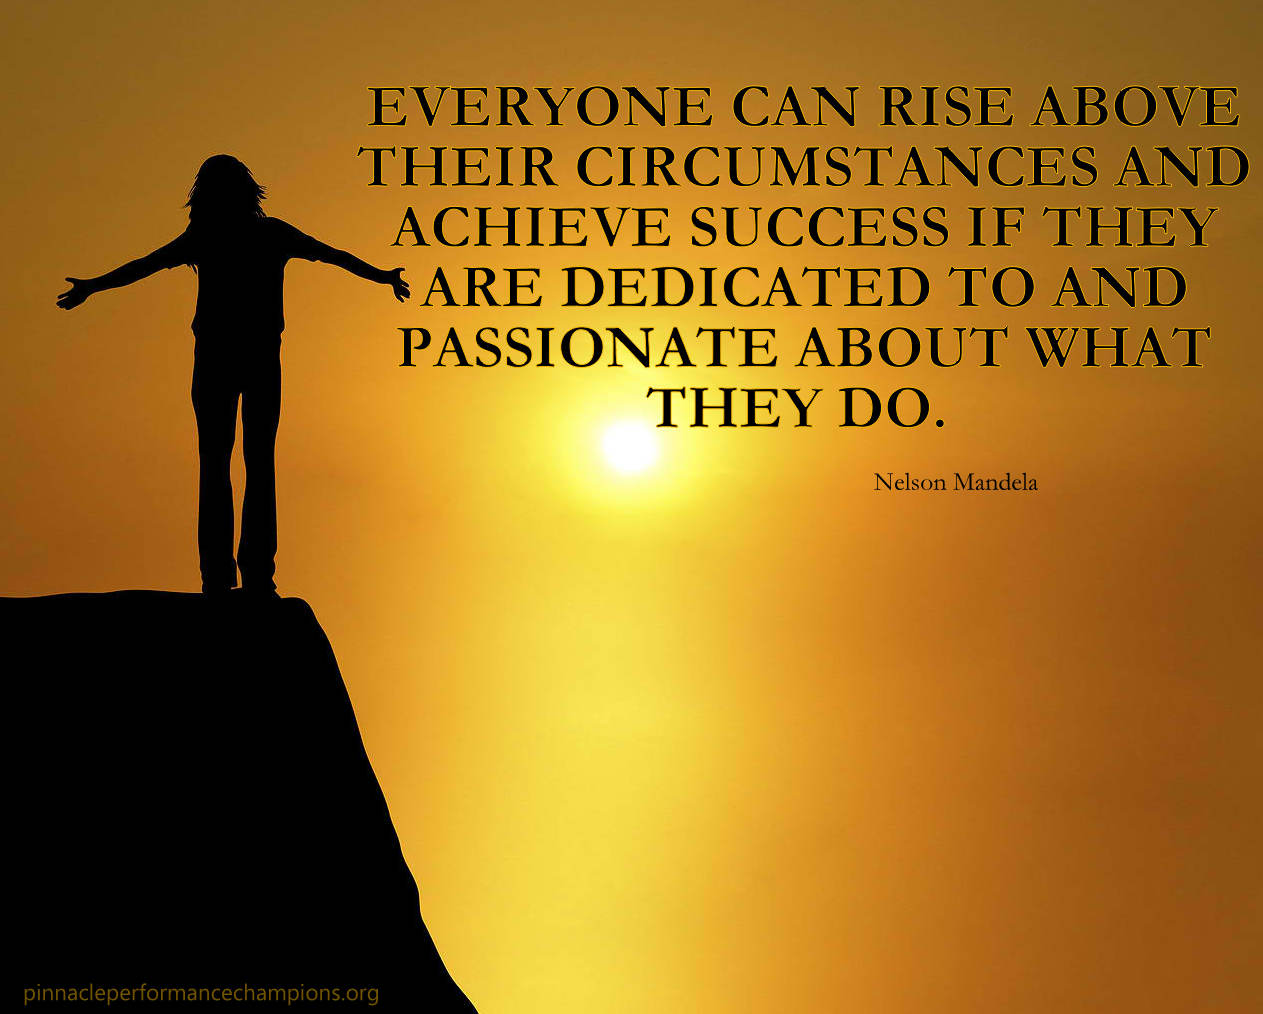 Everyone can rise above their circumstances and achieve success if they are dedicated to and passionate about what they do.